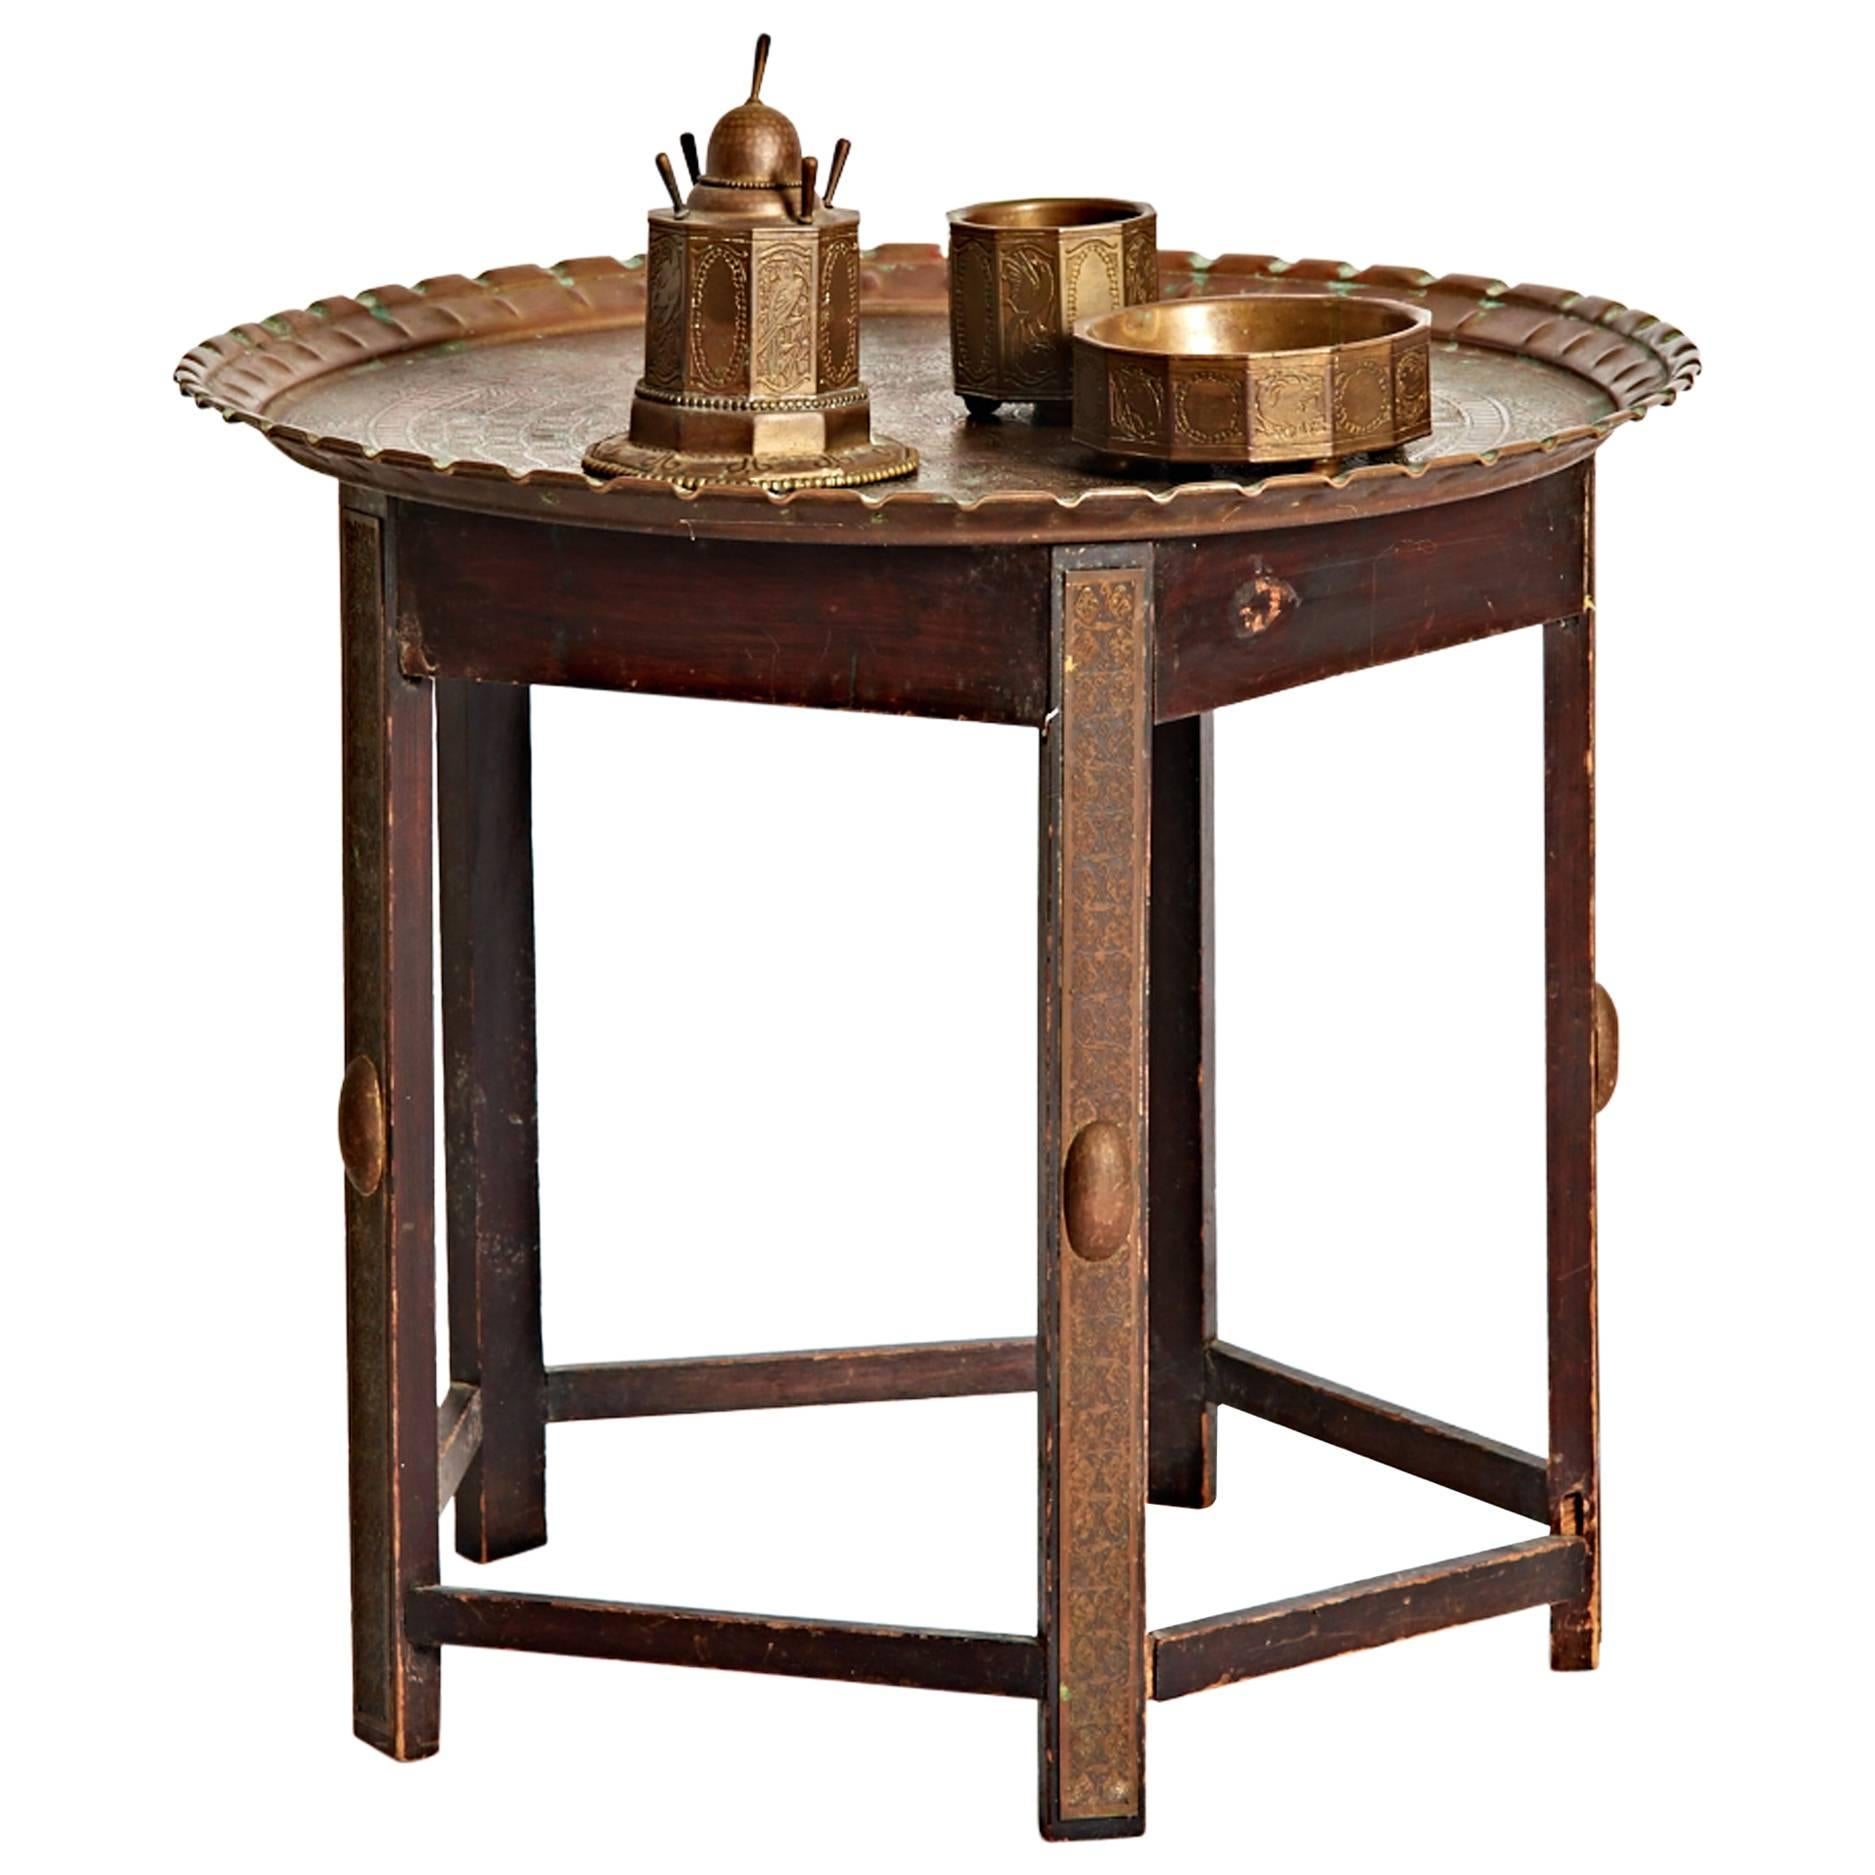 19th Century Bronze Smoking Sellette Table from Erhard & Söhne For Sale